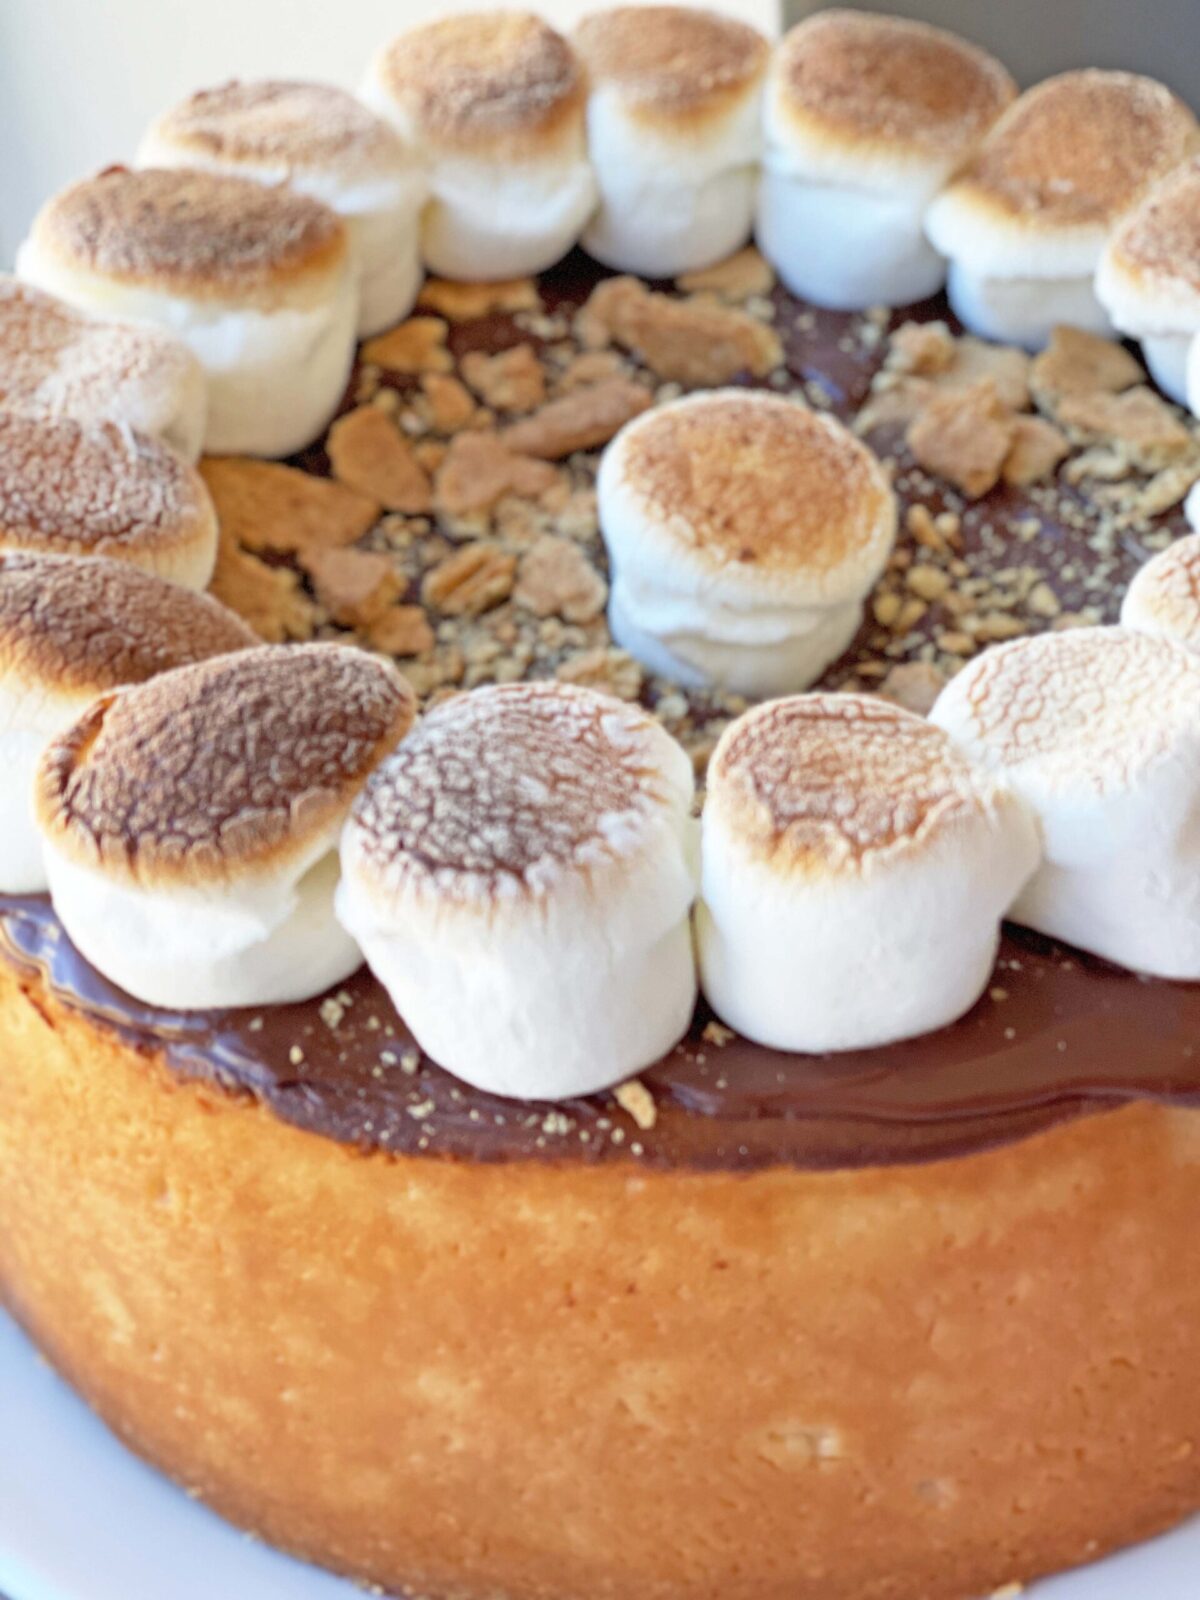 S'mores Cheesecake Topping Recipe. I used the iconic NYC cheesecake  to make a chocolate marshmalllow easy dessert. www.ChopHappy.com #NYCcheesecake #s'mores 